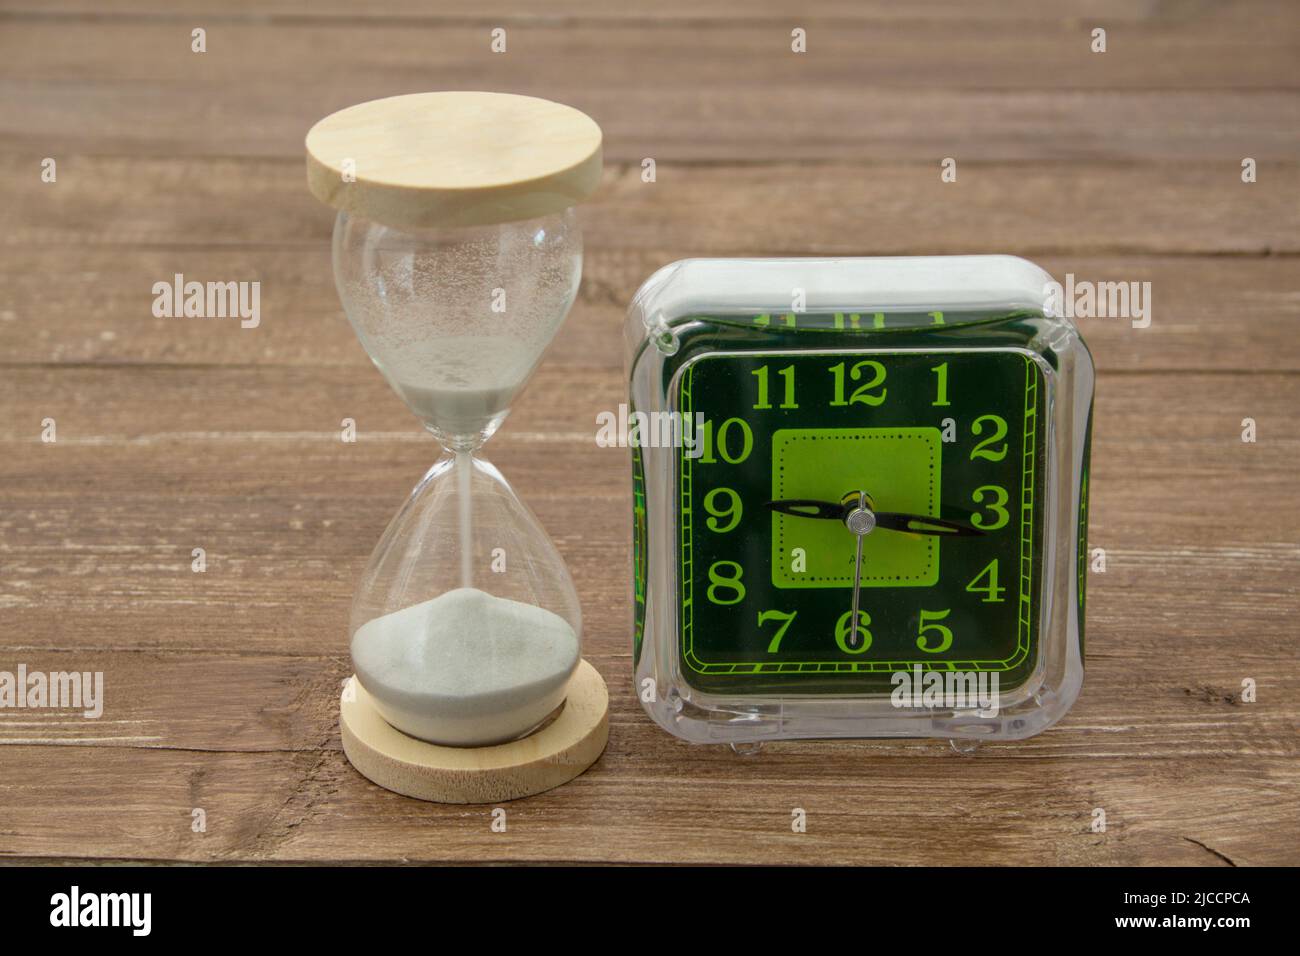 Image of an hourglass and a table clock. Reference to the passage of time Stock Photo